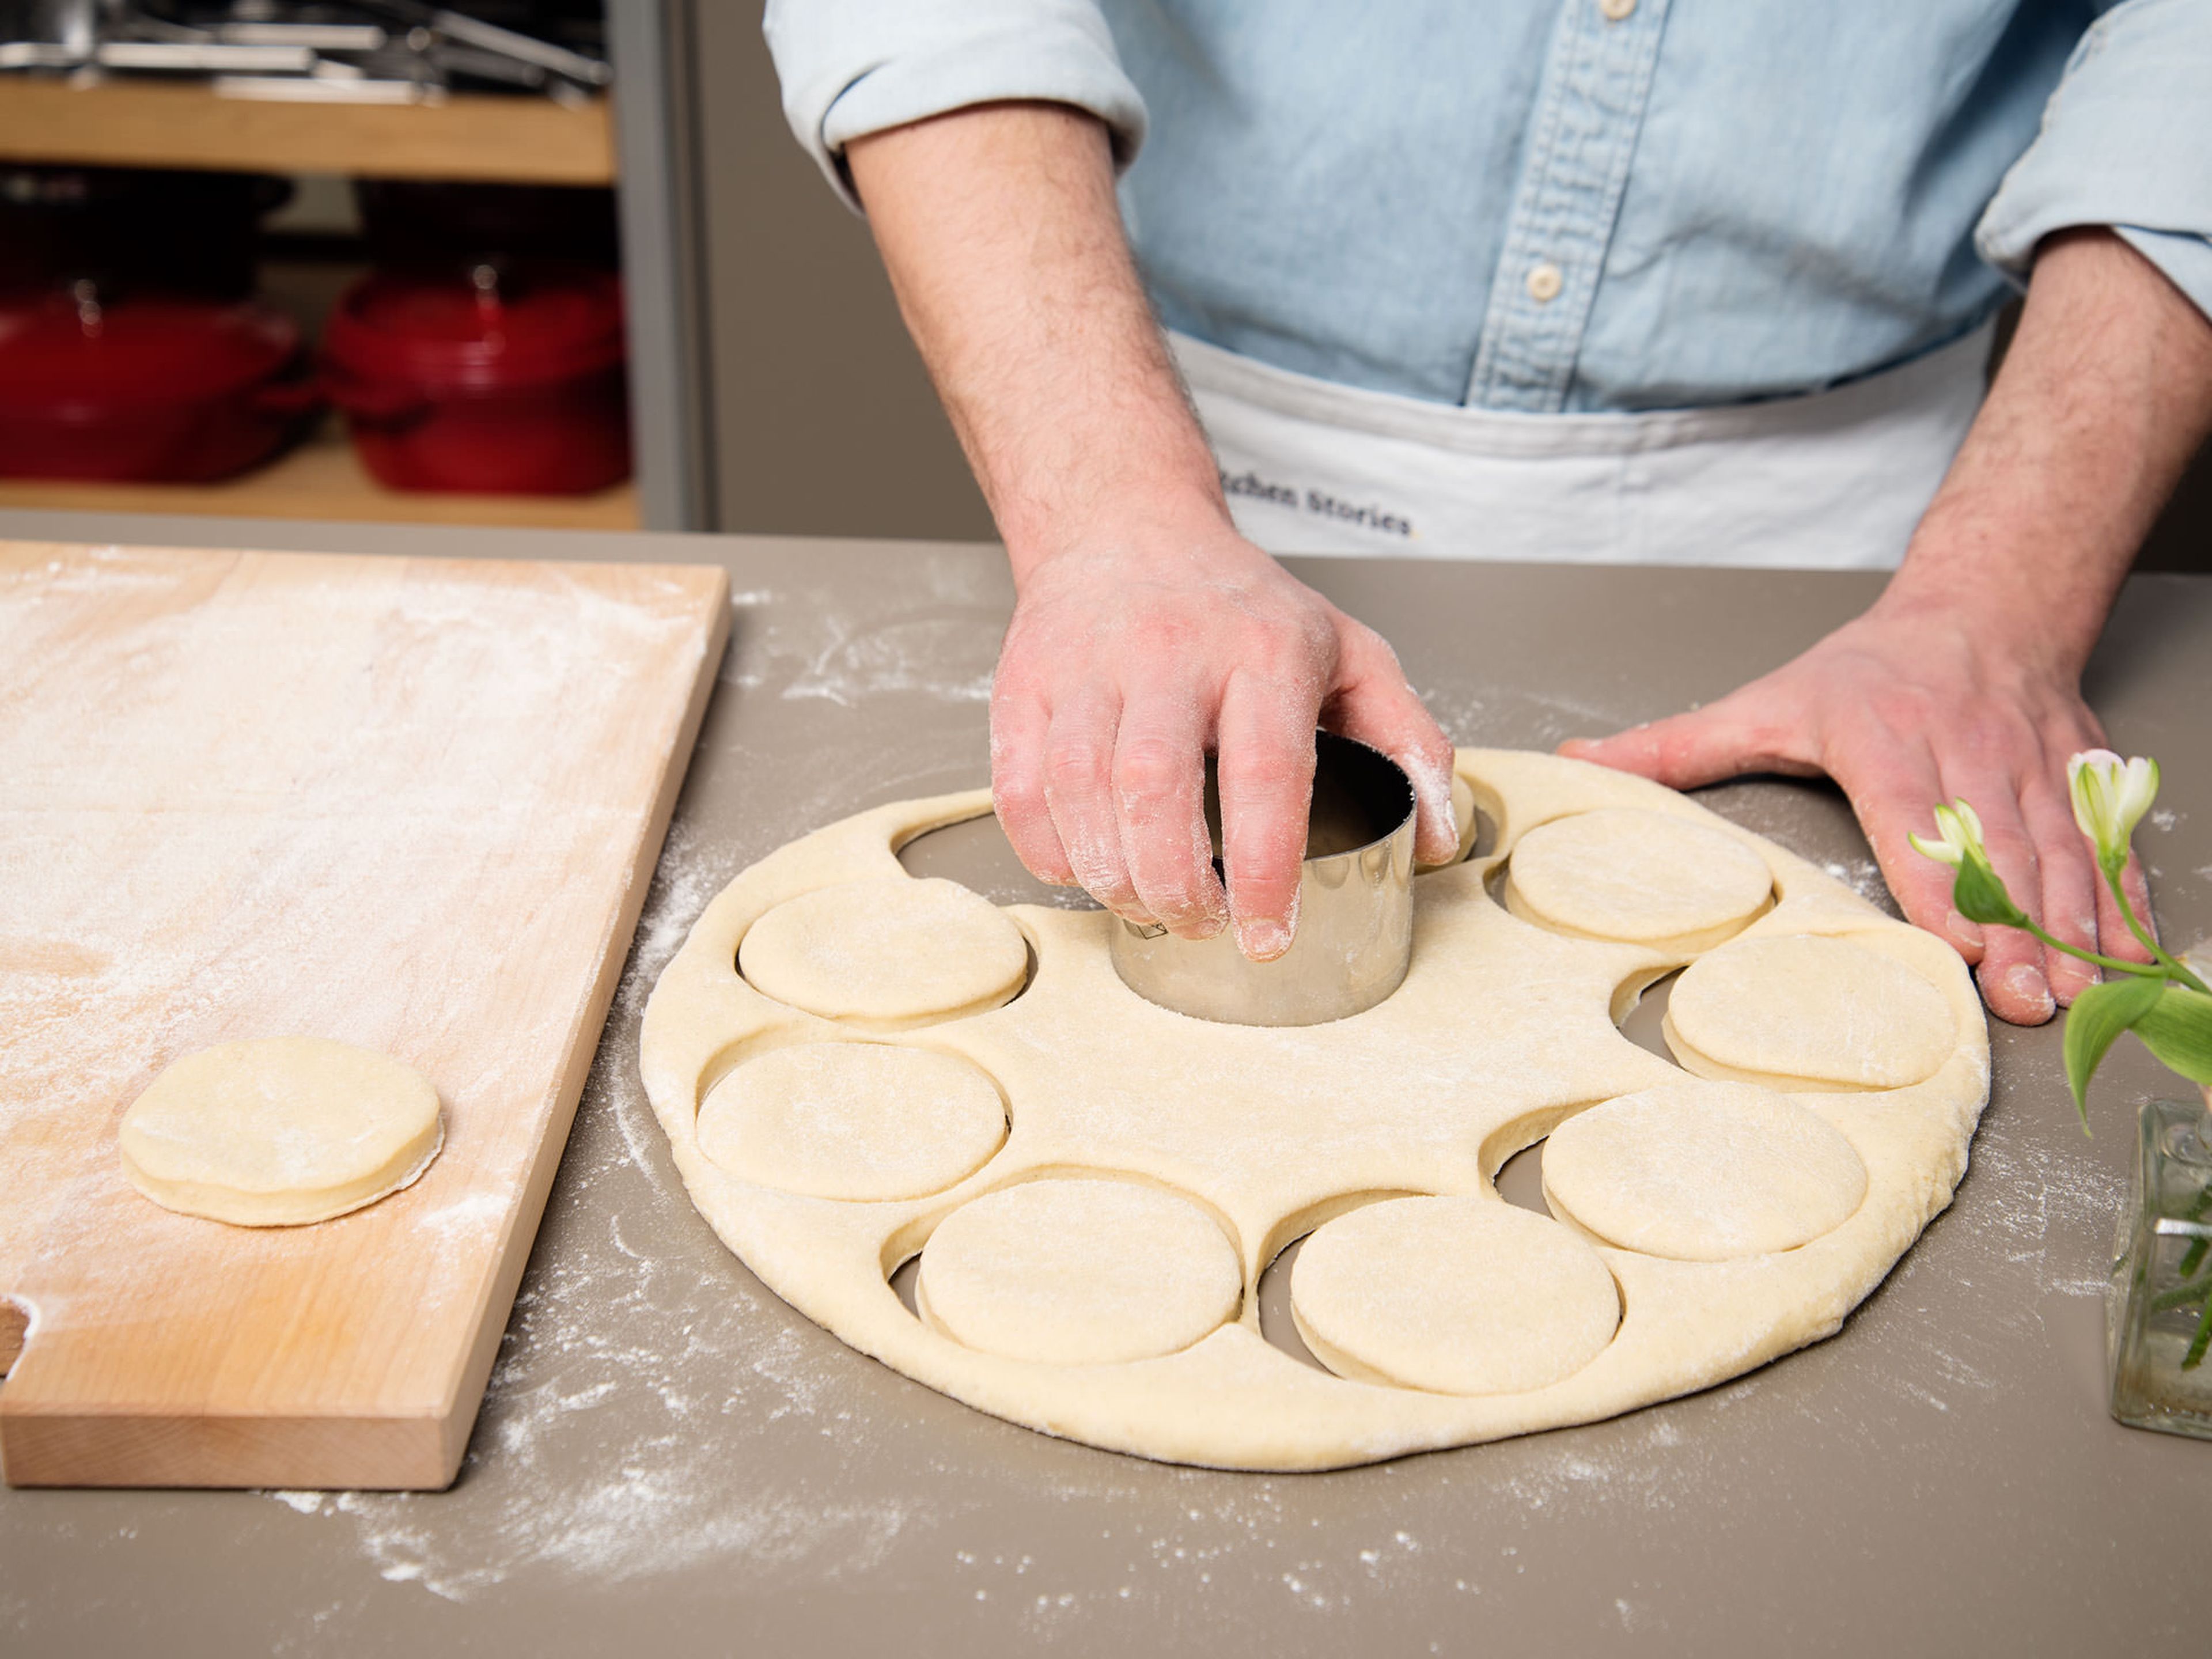 Flour work surface and briefly knead dough until smooth. Roll dough out and cut out circles with a cookie cutter or glass. Transfer them onto a cutting board and let rise again in a warm place for approx. 15 – 20 min.